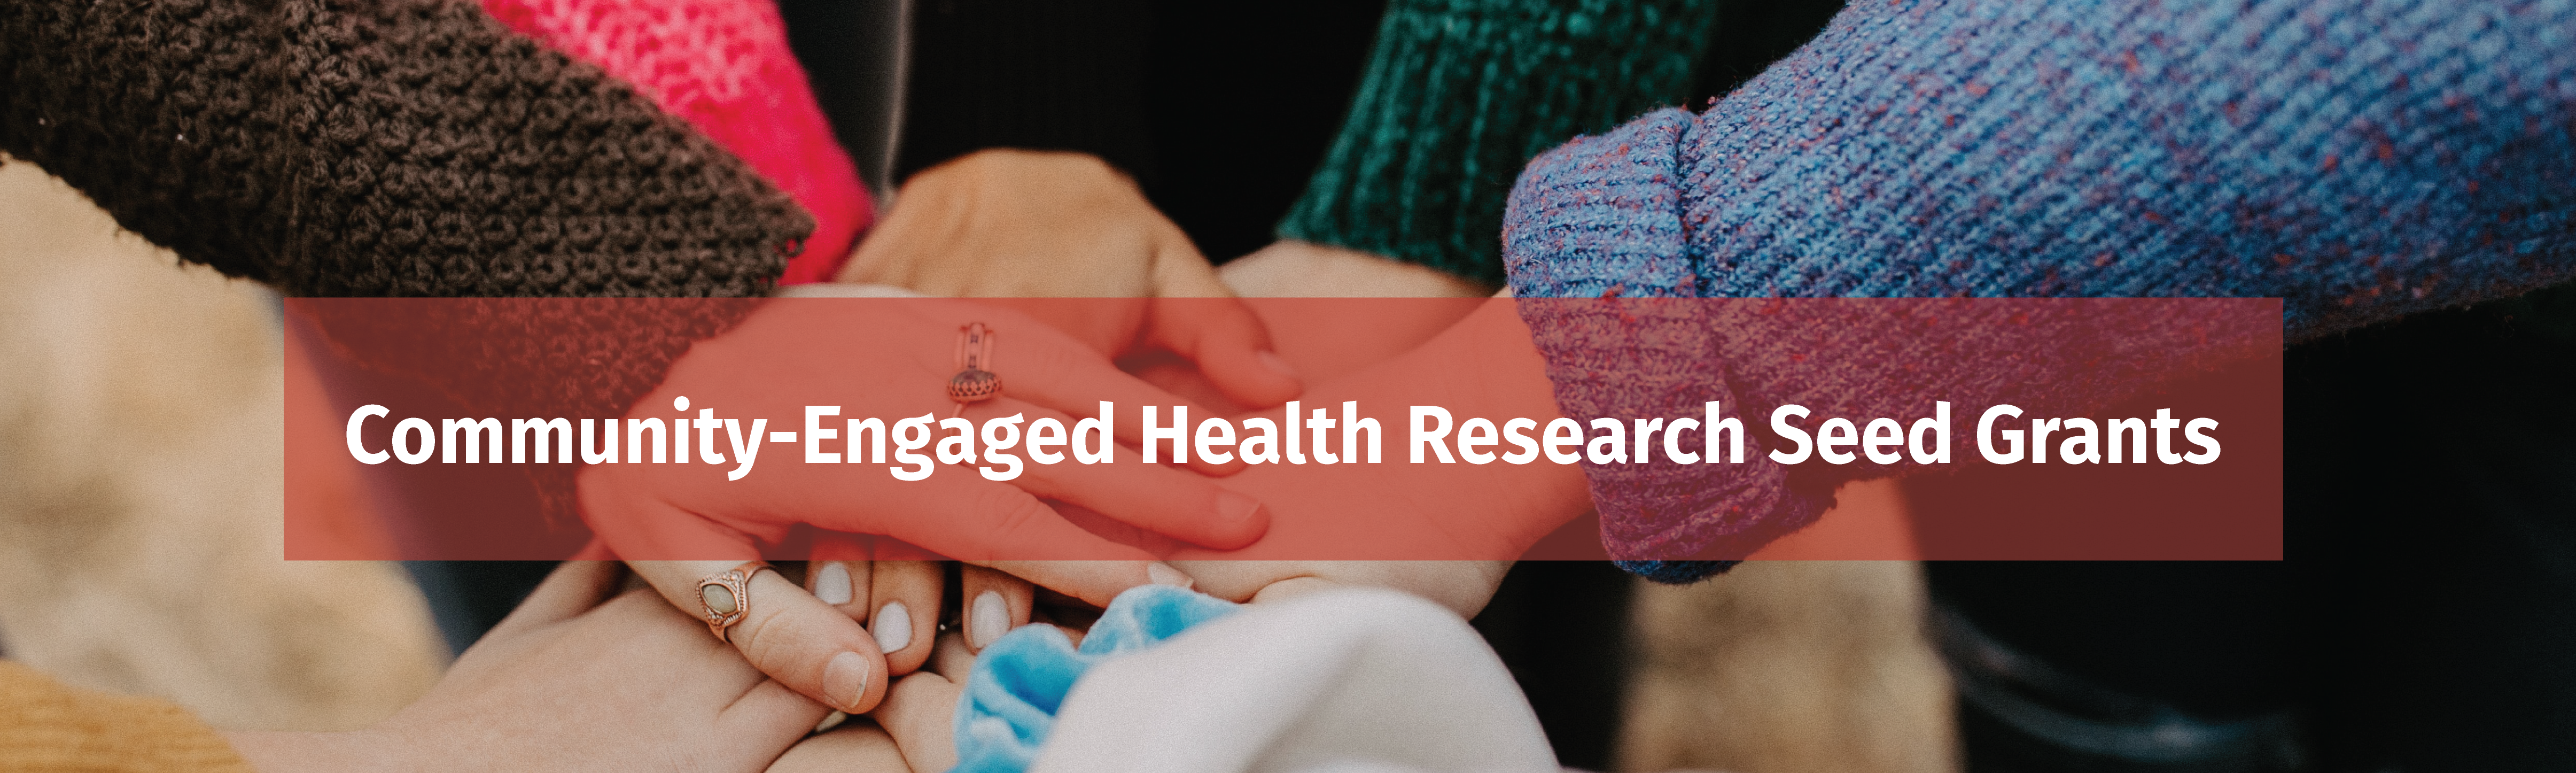 Community-Engaged Health Research Seed Grant 